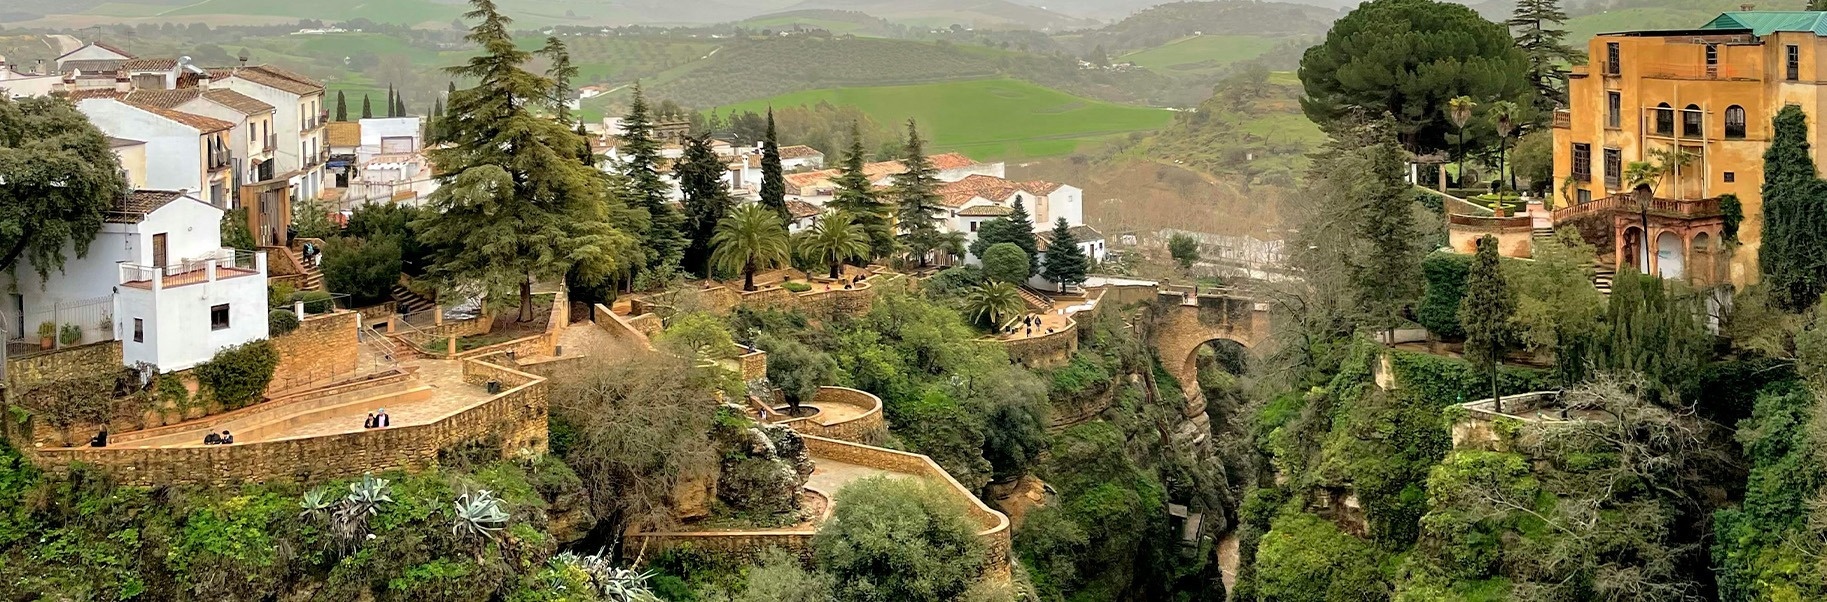 a view of a valley with buildings and trees